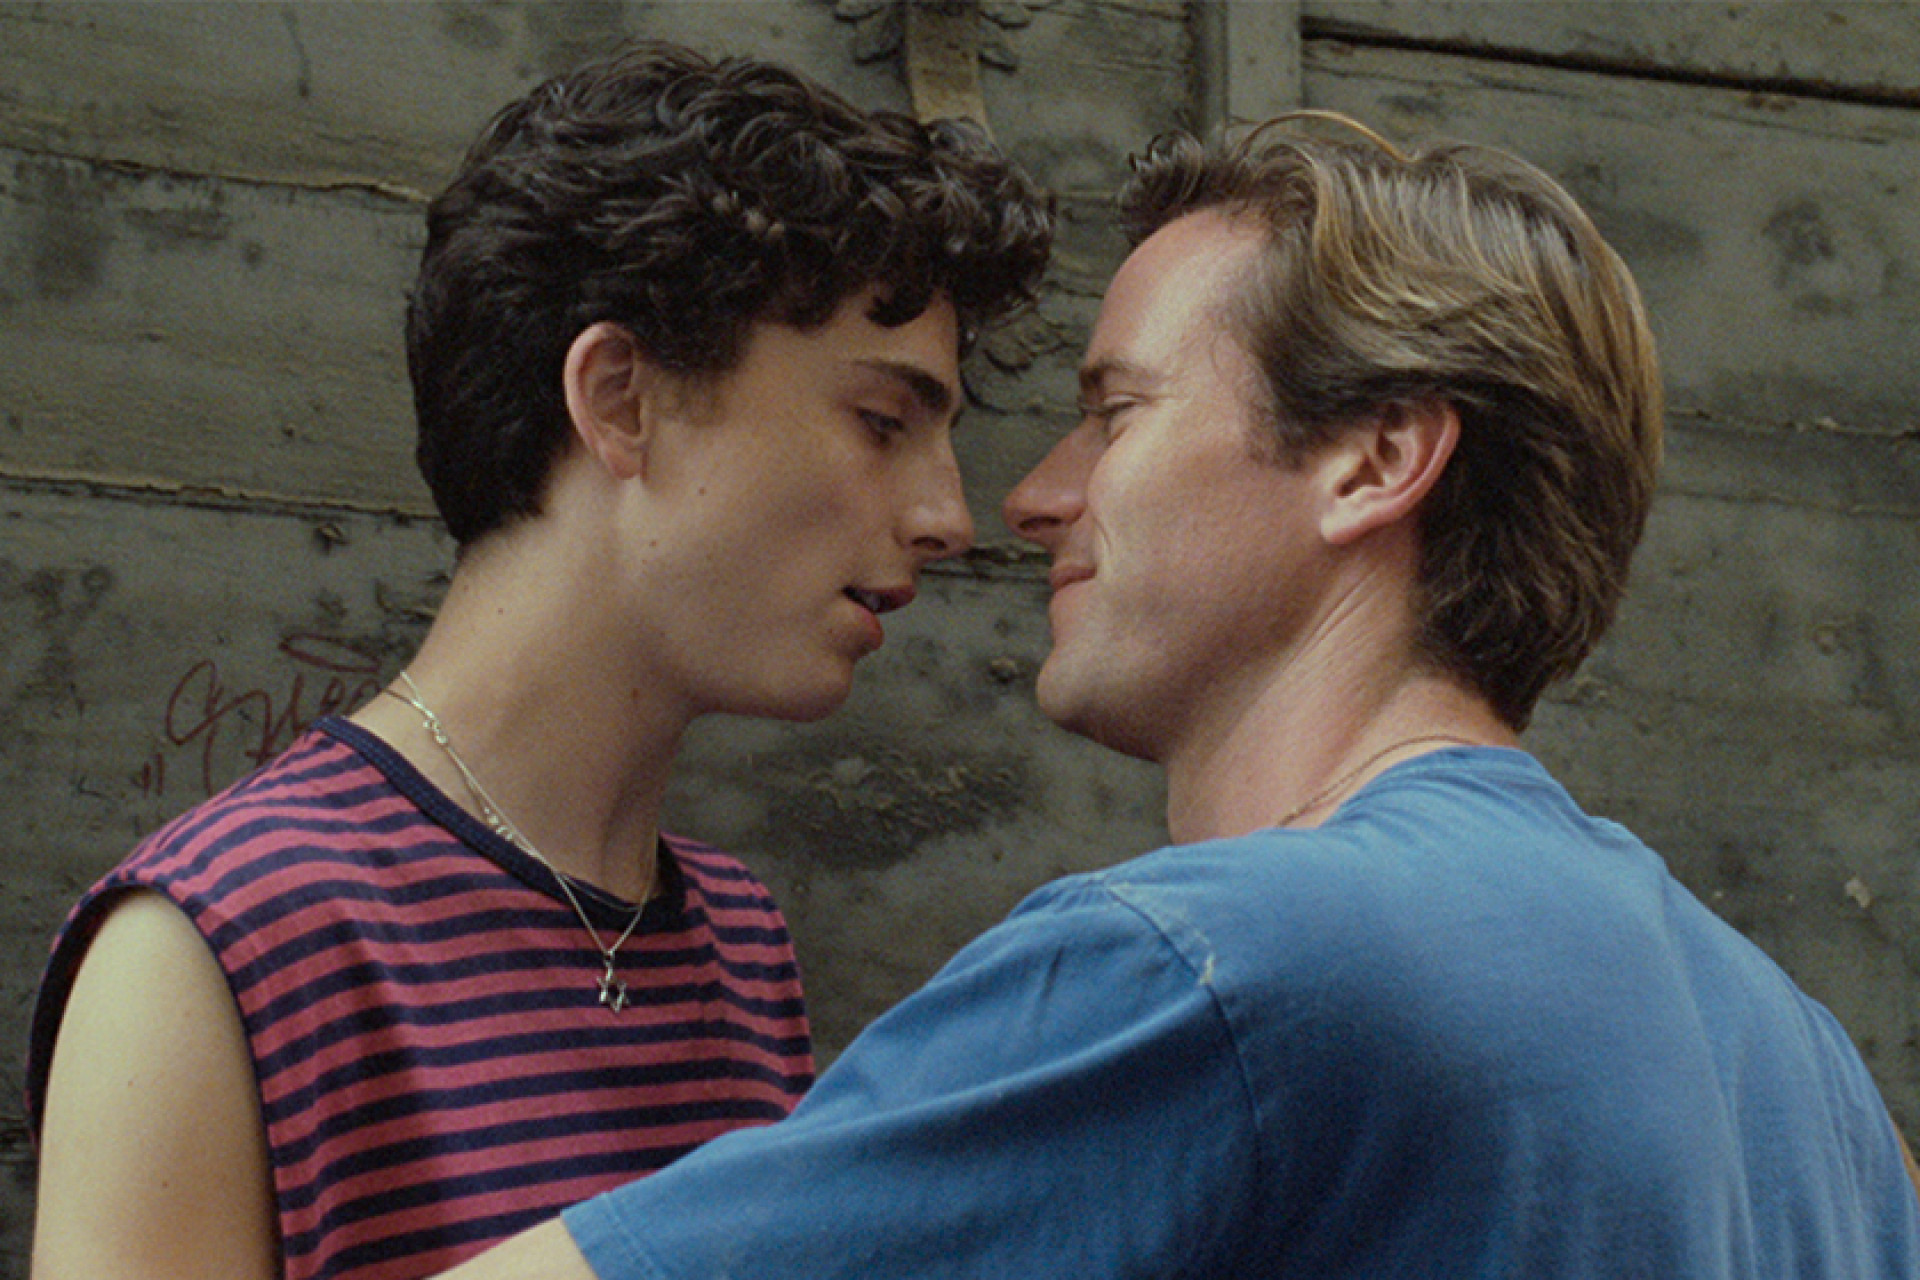 call-me-by-your-name-2-sequel-cast-timothee-chalamet-and-armie-hammer-teaser